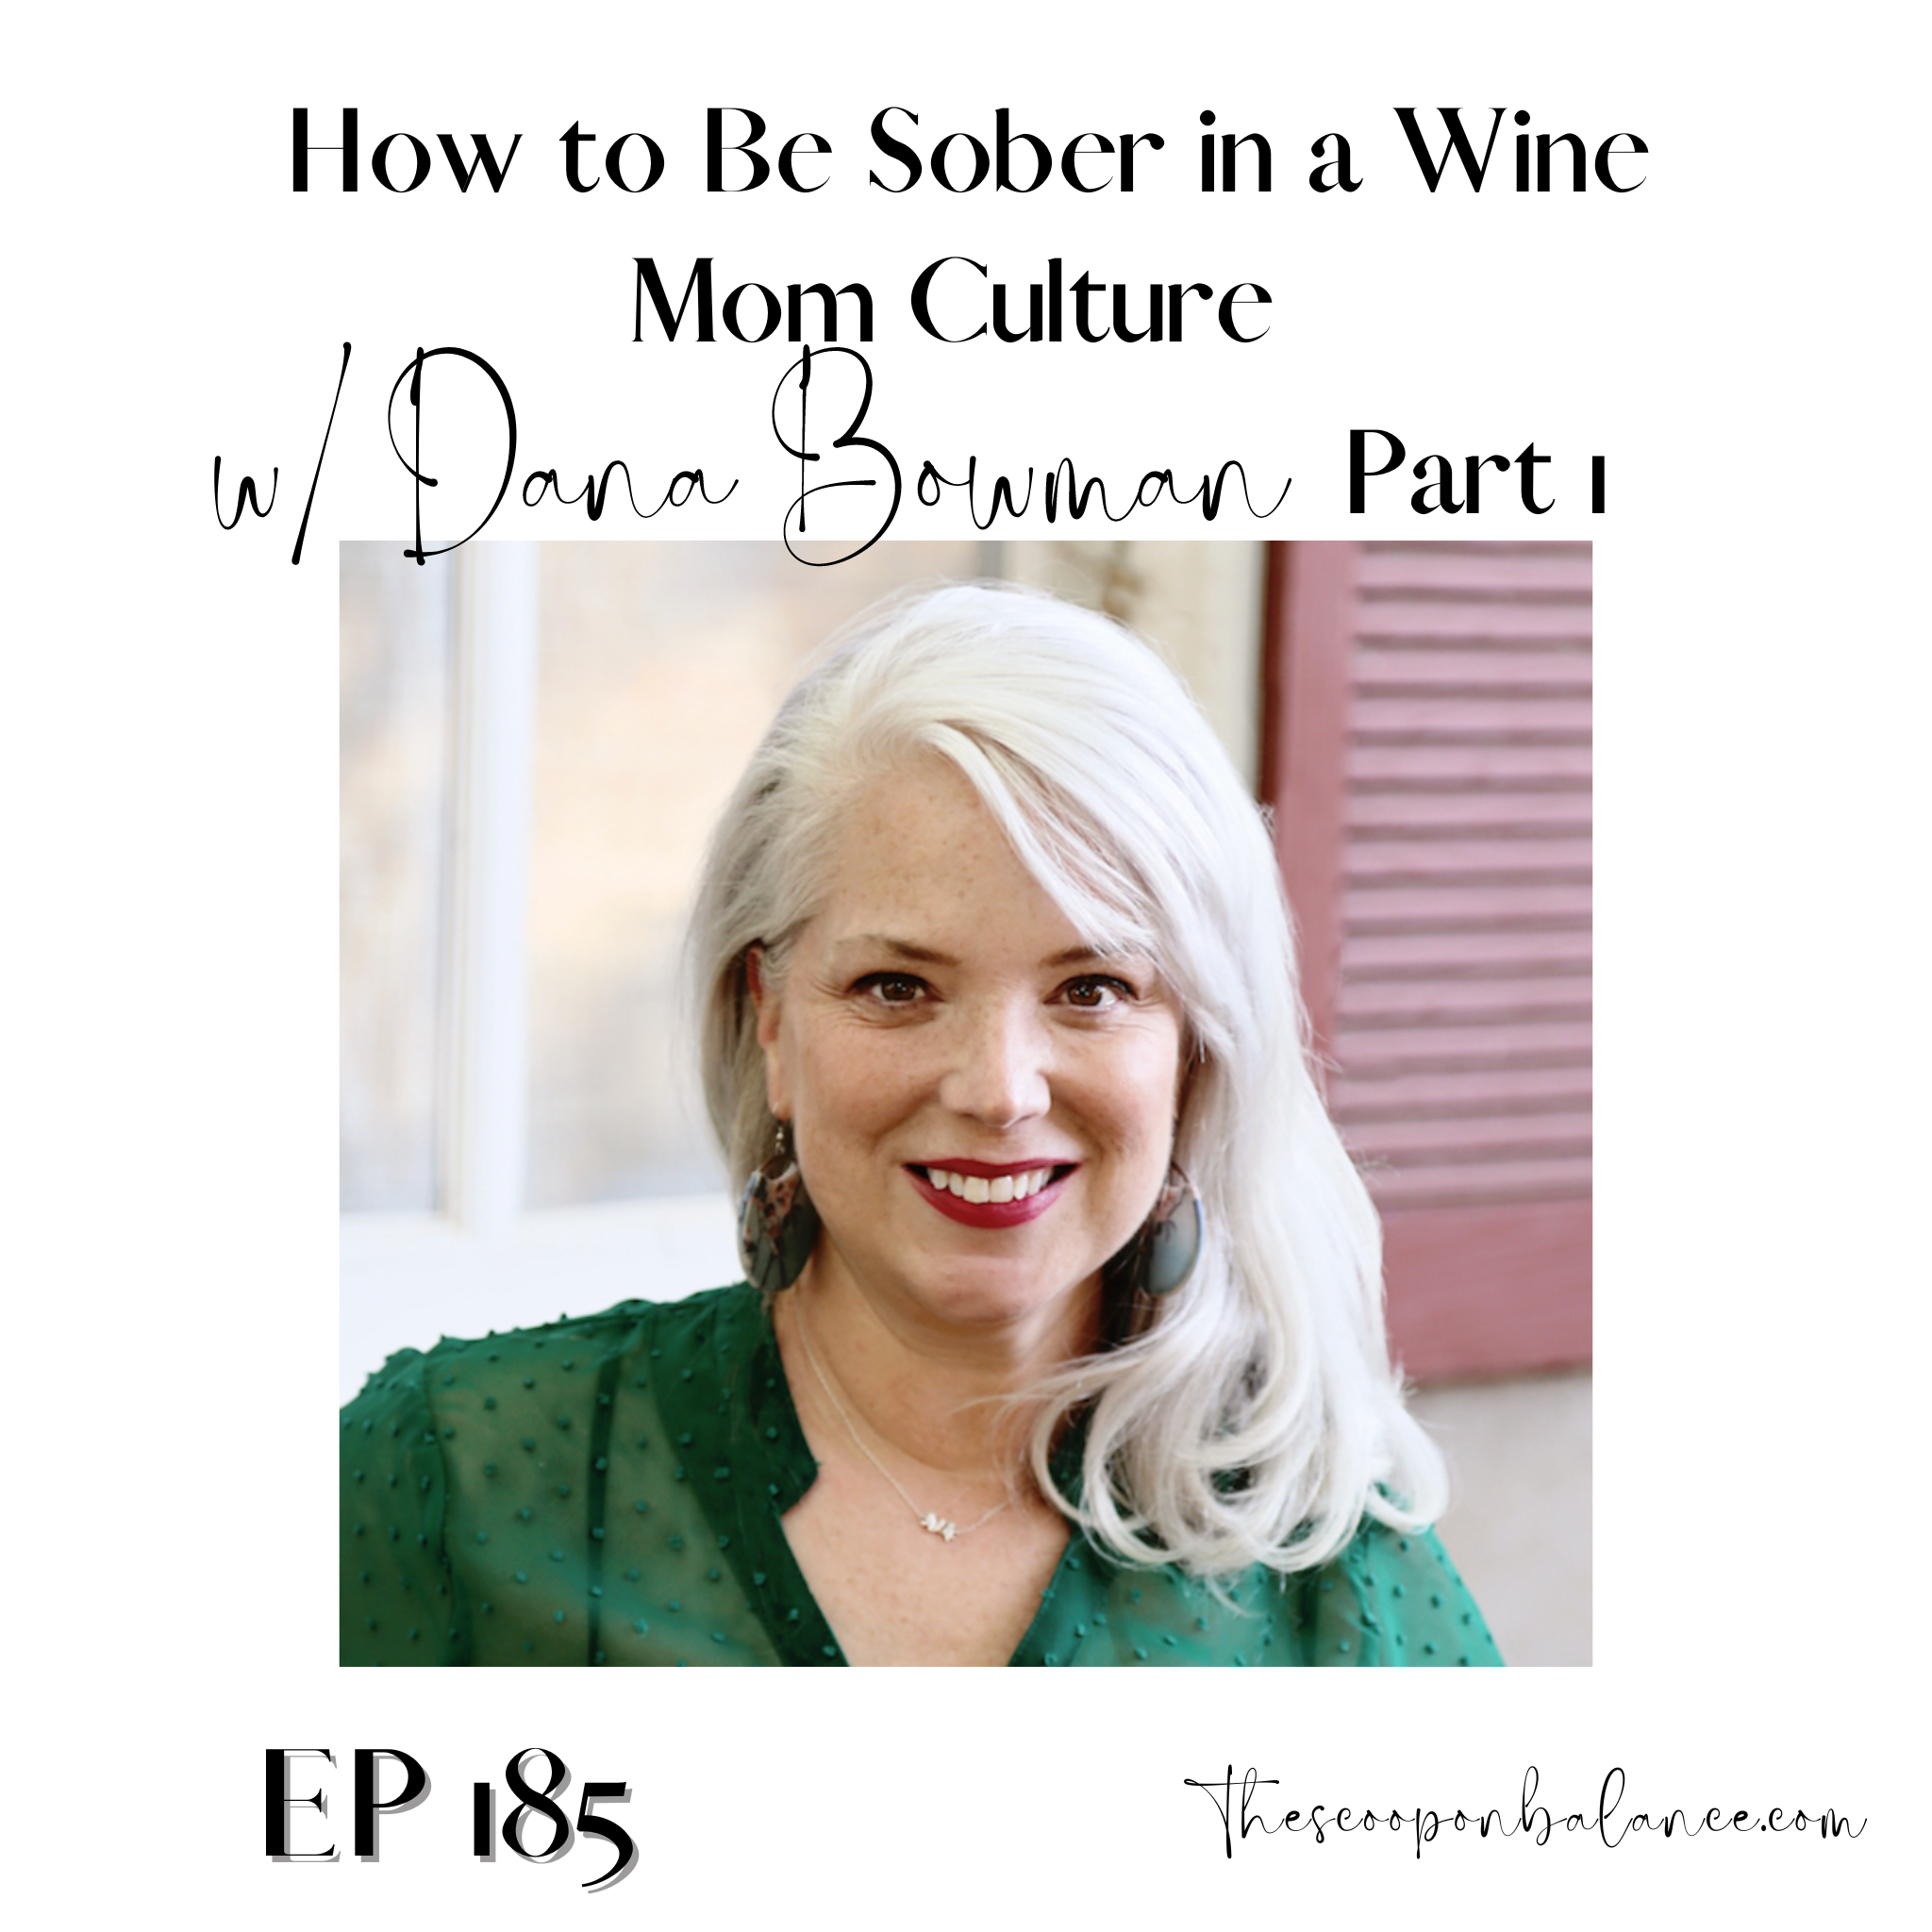 Ep 185: How to Be Sober in a Wine Mom Culture w/ Dana Bowman, Part 1